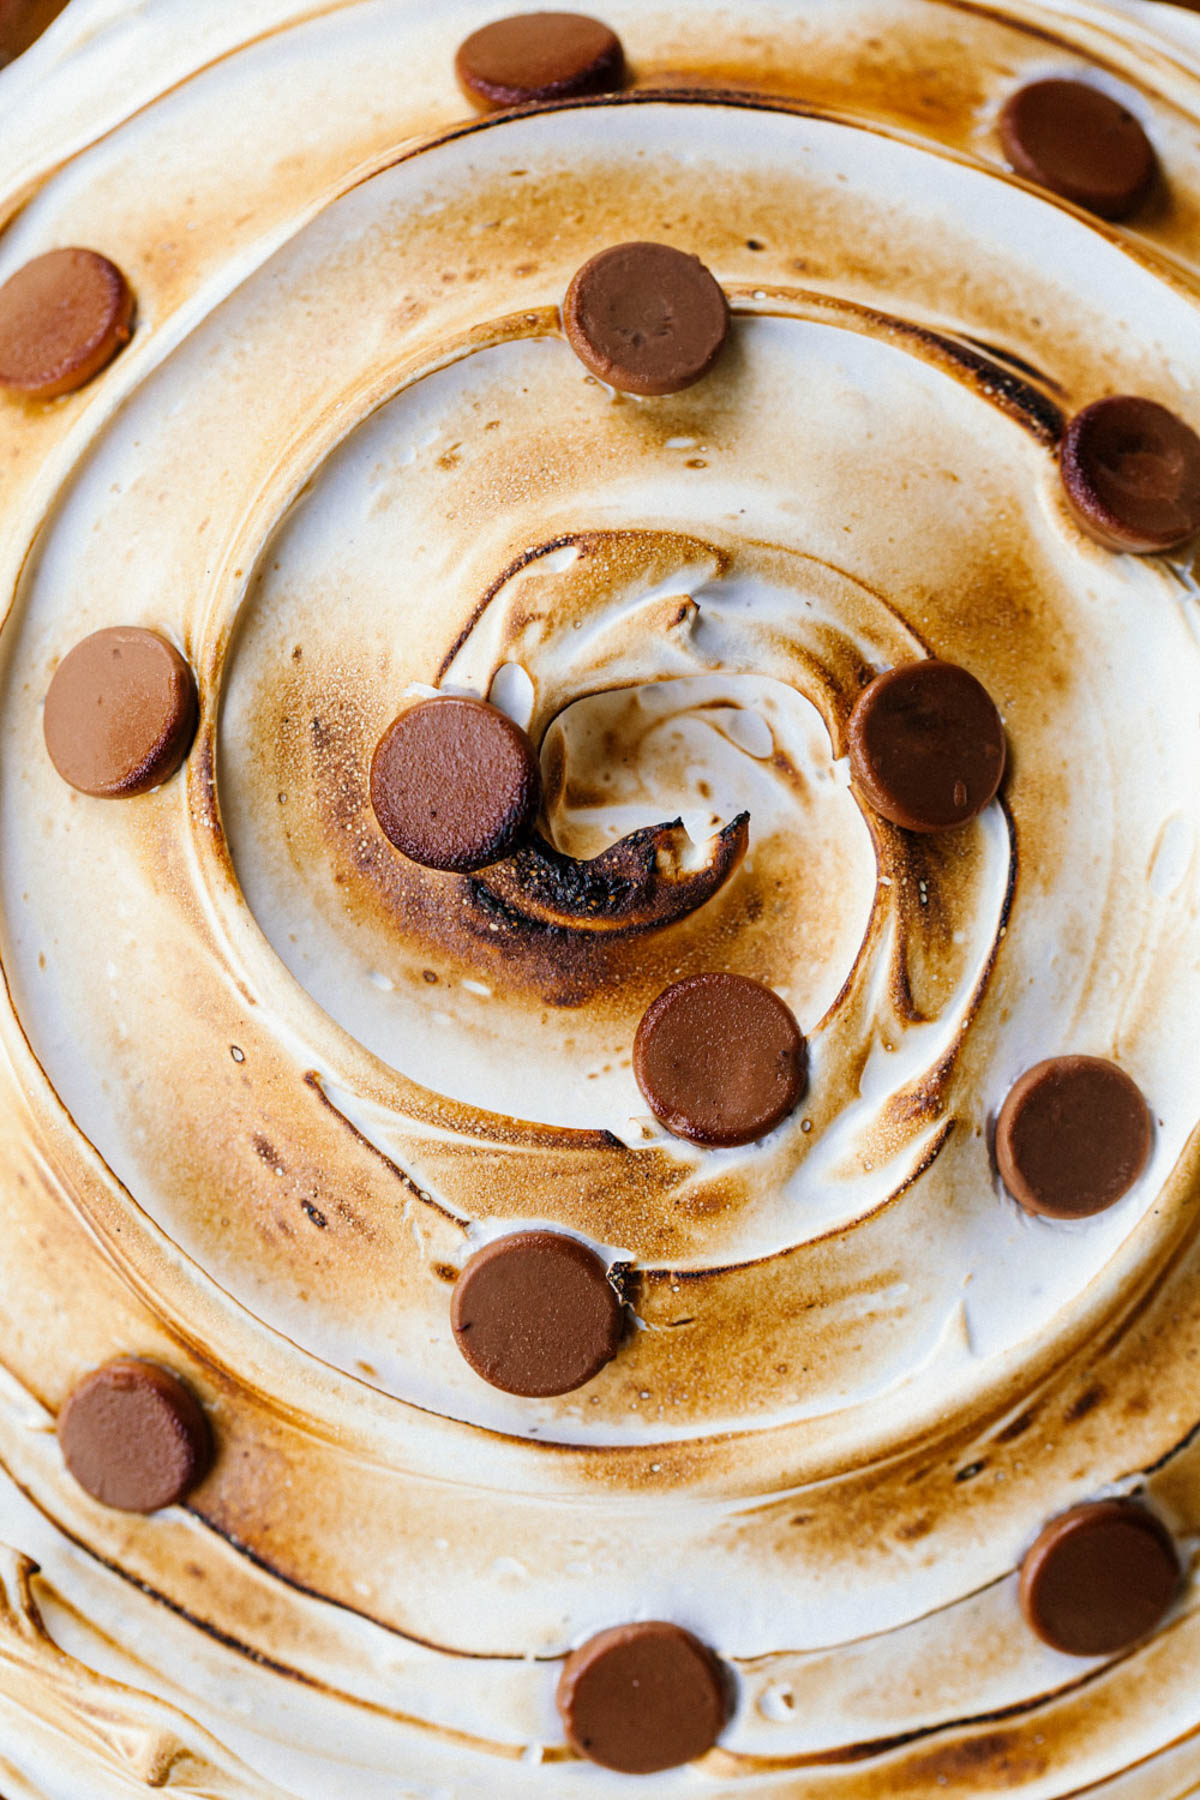 An overhead image of toasted meringue topping on a pie with chocolate chip polka dots